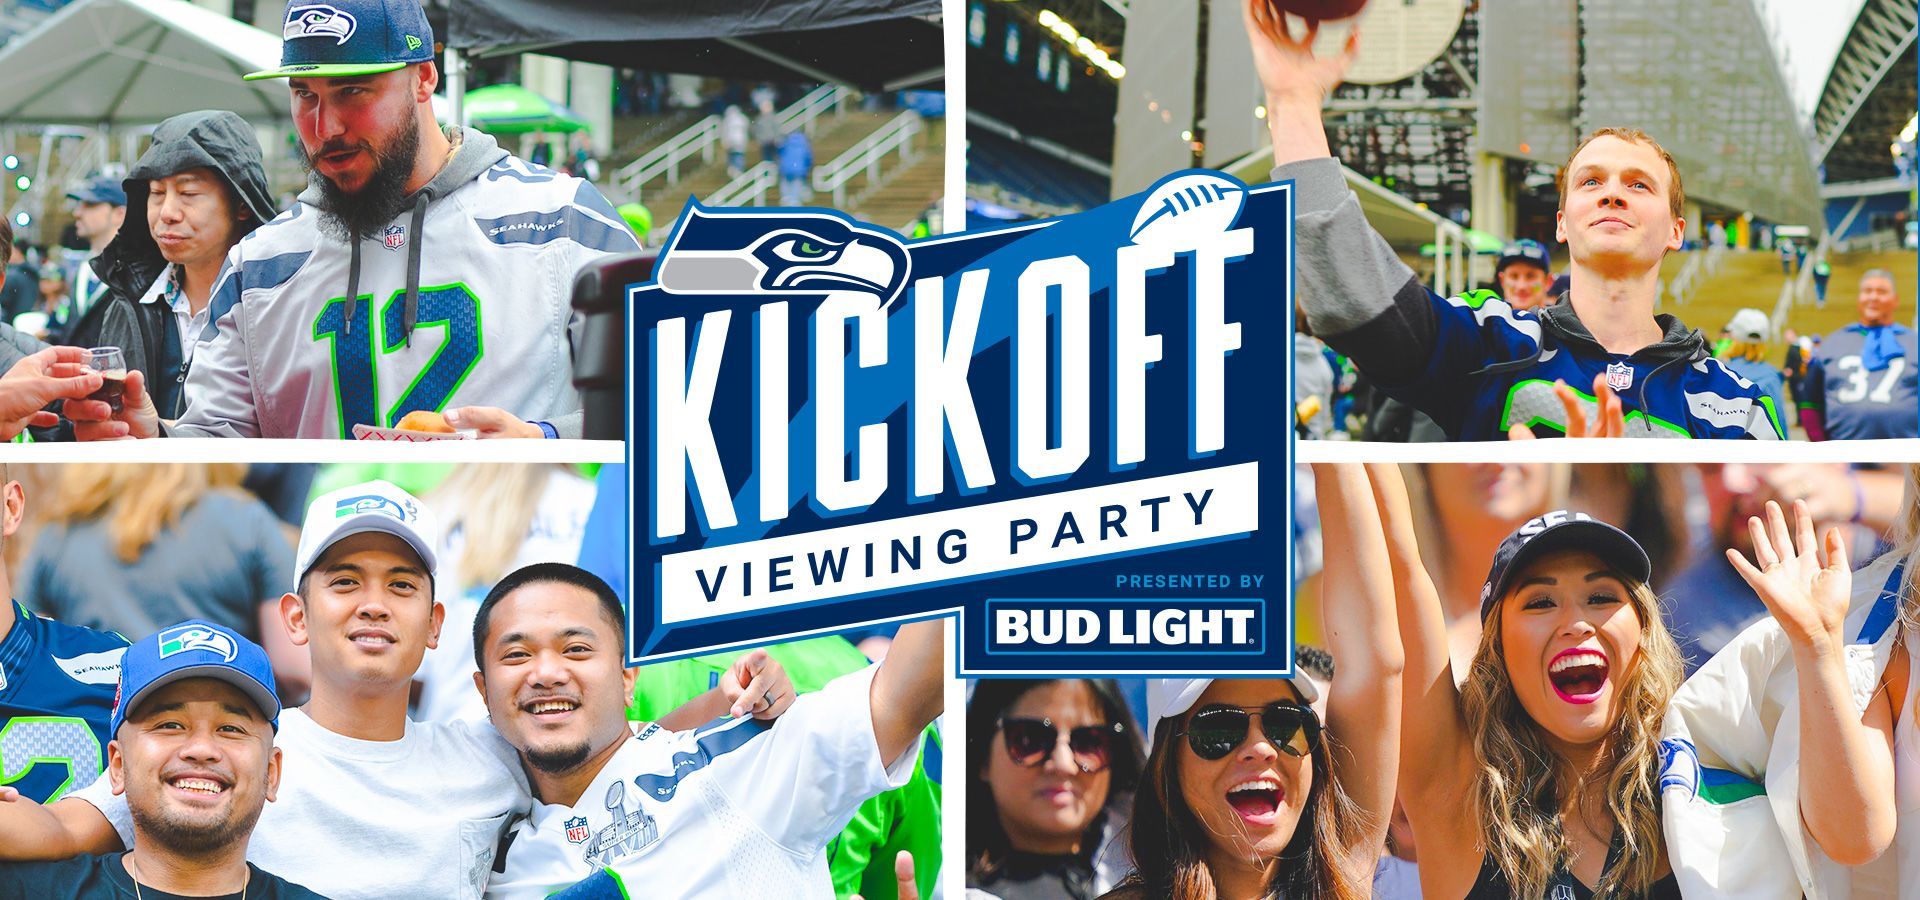 Join TODAY's NFL Kickoff watch party on the Plaza!